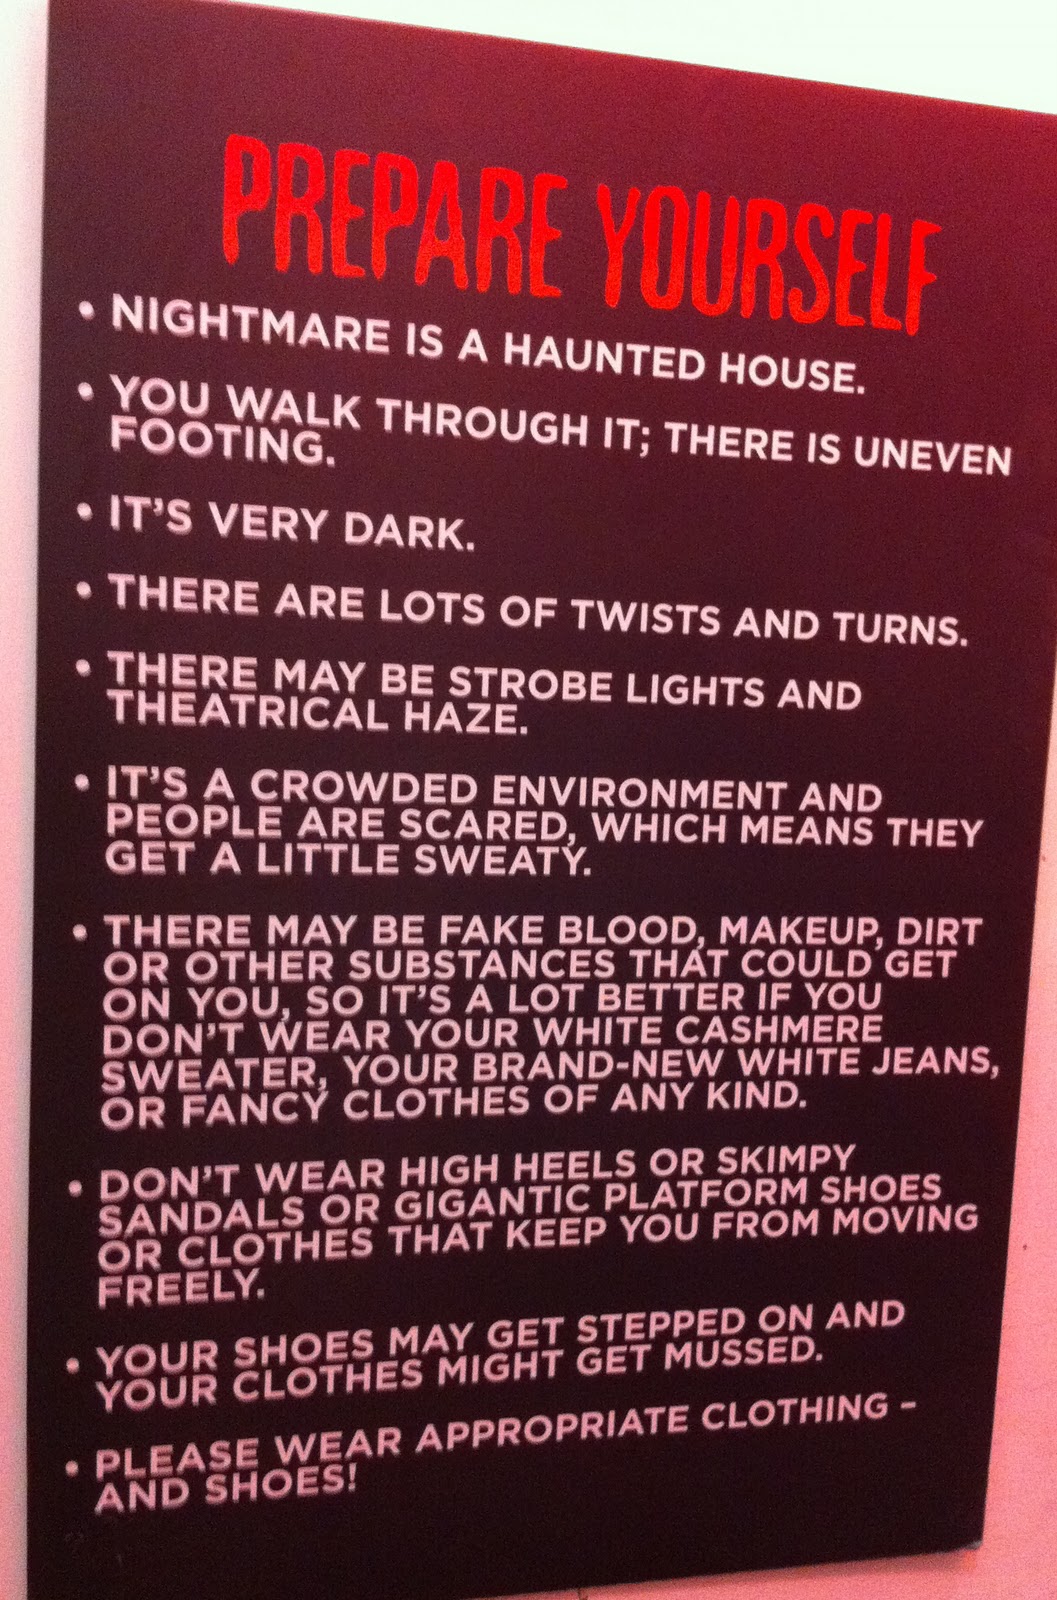 30 DAYS TO THE BIG 30!! DAY 5 Haunted house